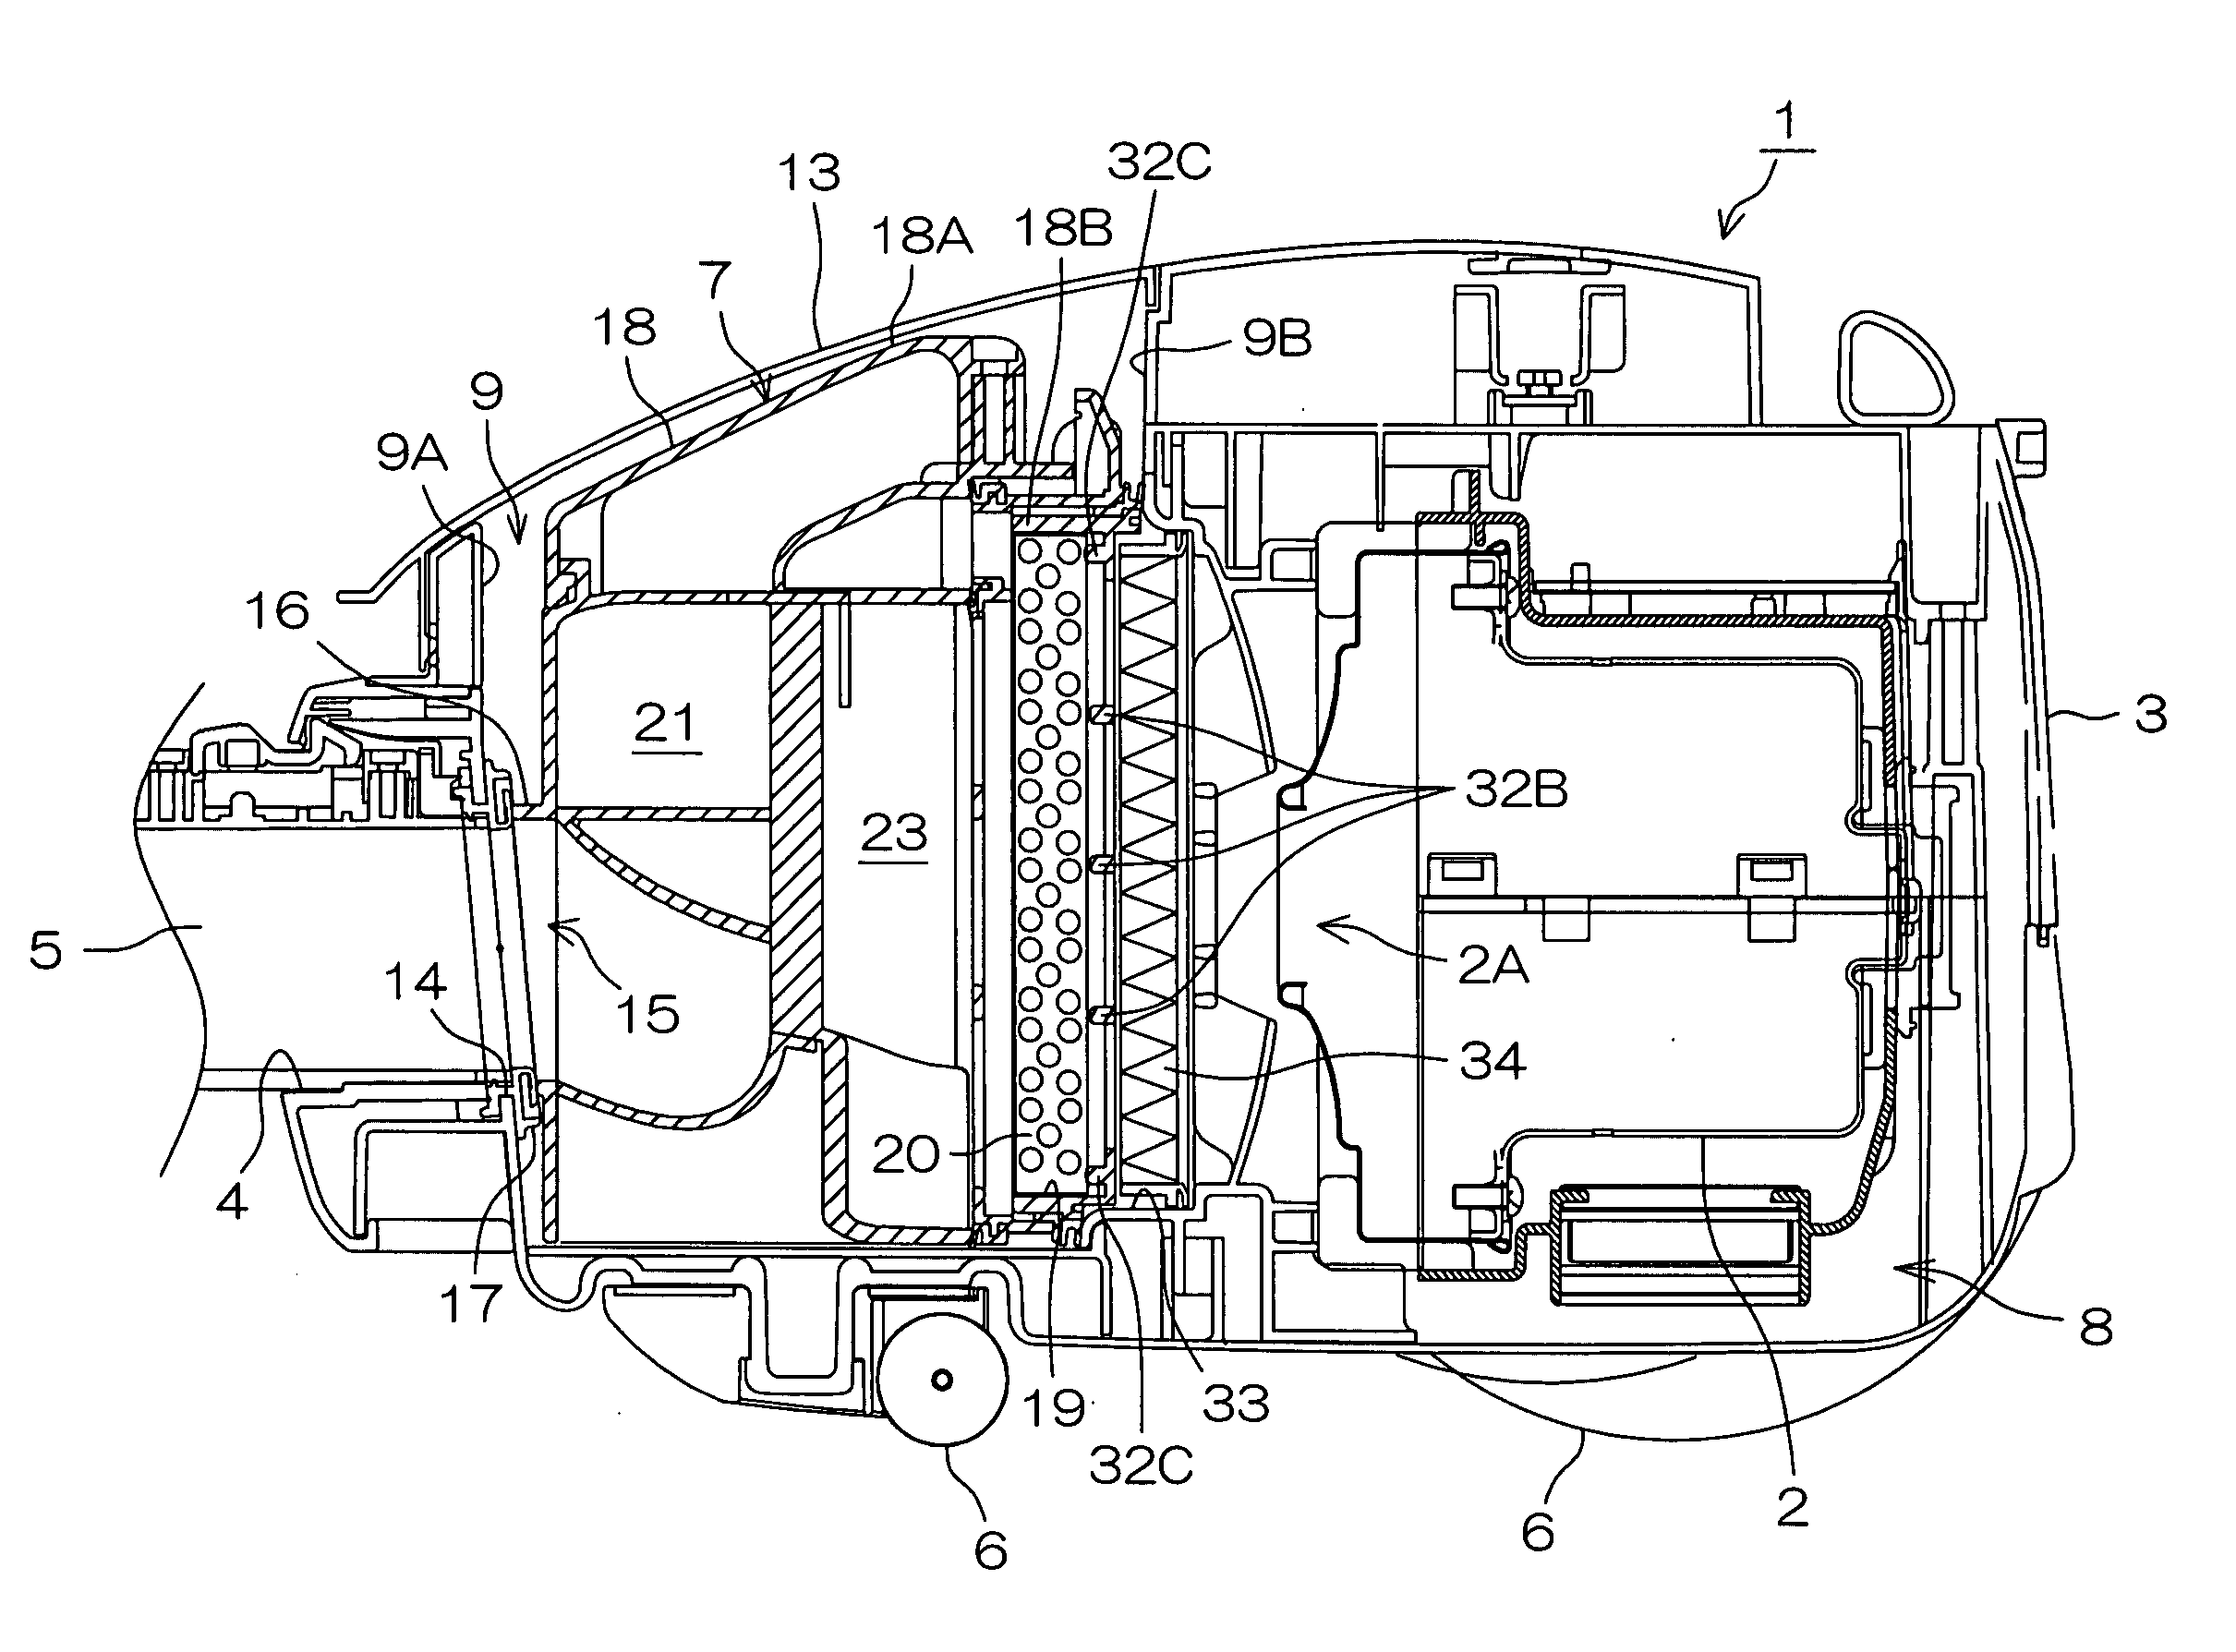 Electric vacuum cleaner and cyclonic dust collecting apparatus